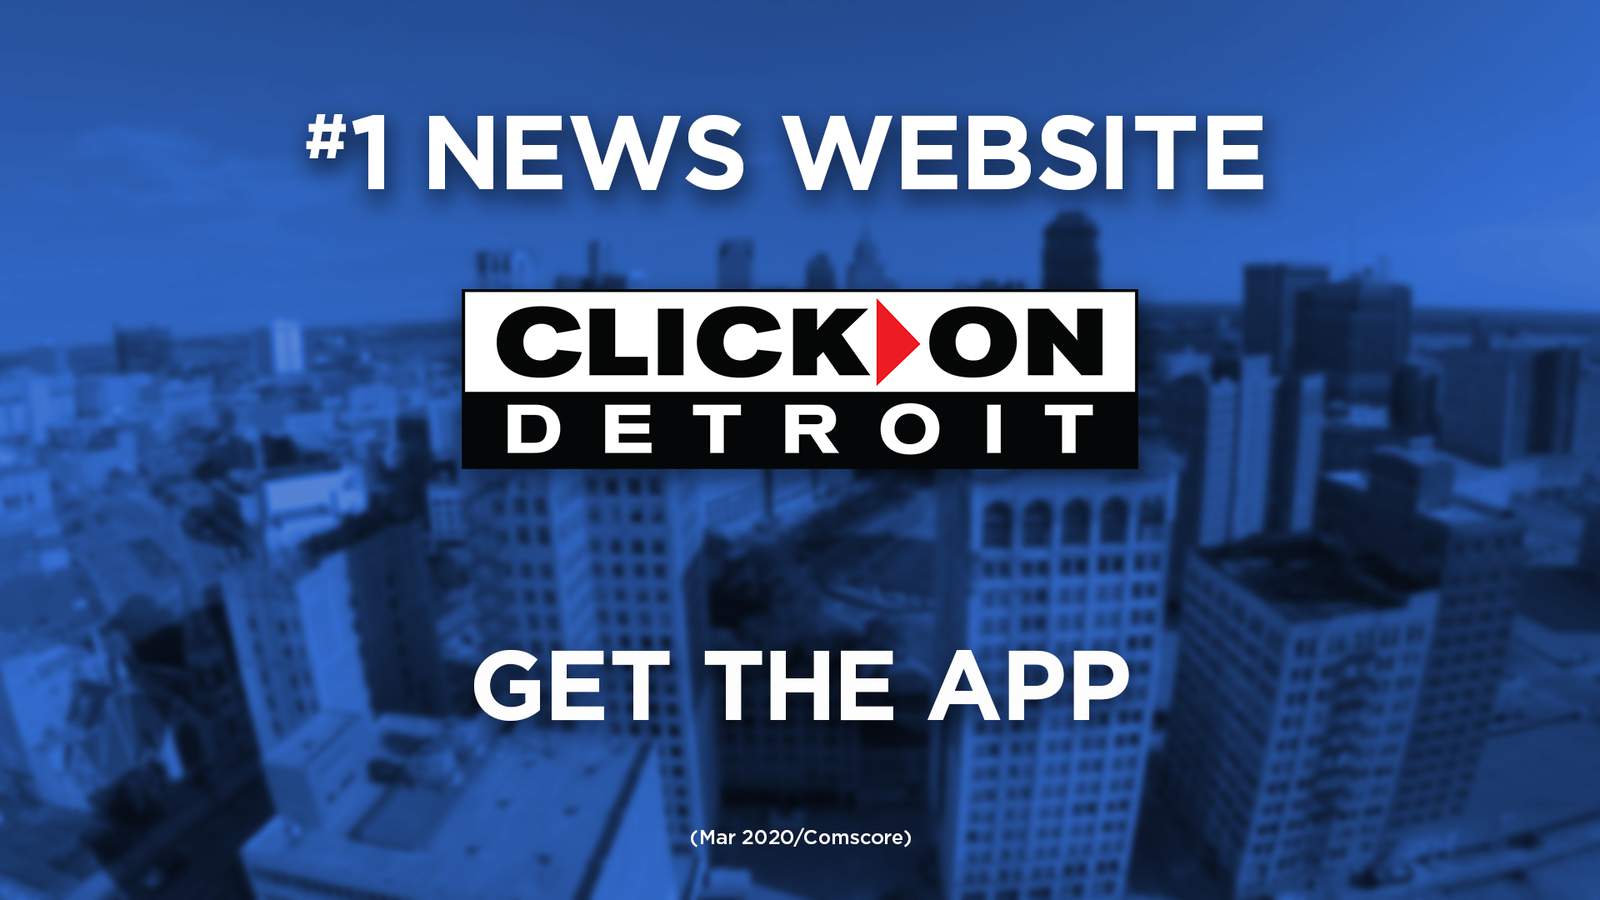 Download the ClickOnDetroit news app today